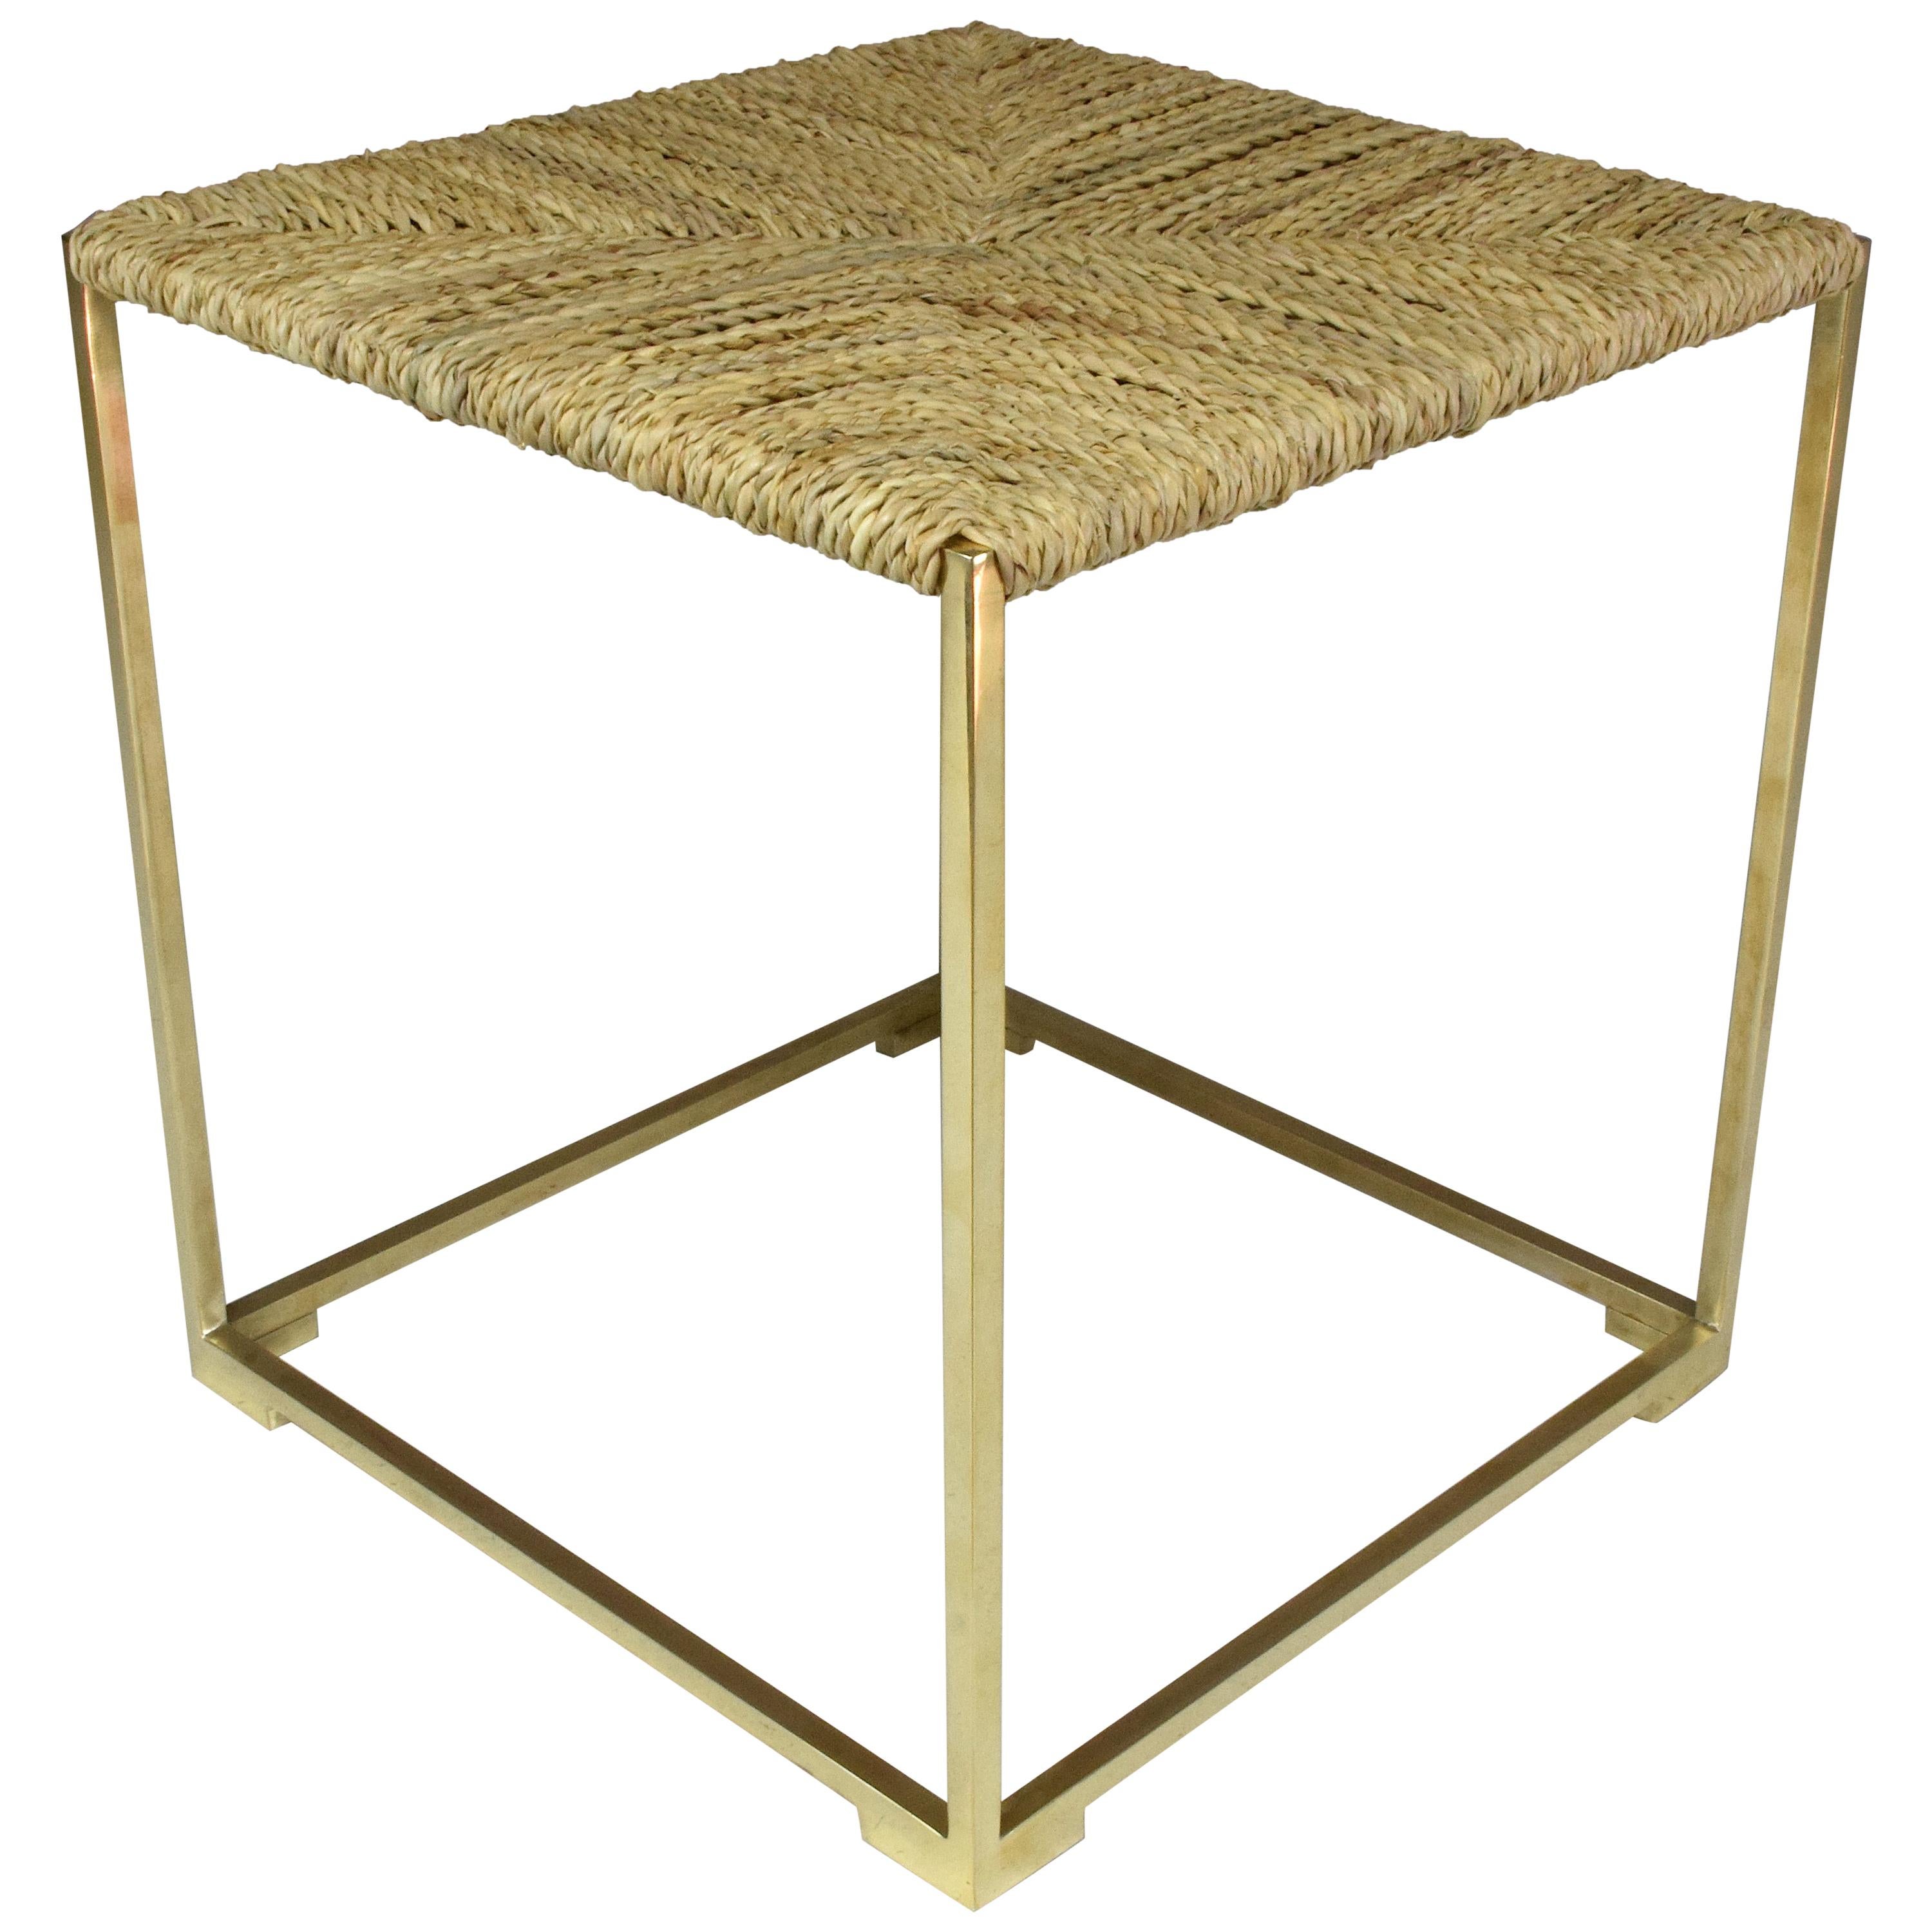 A contemporary handcrafted square stool or bench designed in a gold brass structure - pictured here in a polished finish - with a hand-woven top in a very resistant natural Moroccan fiber named 